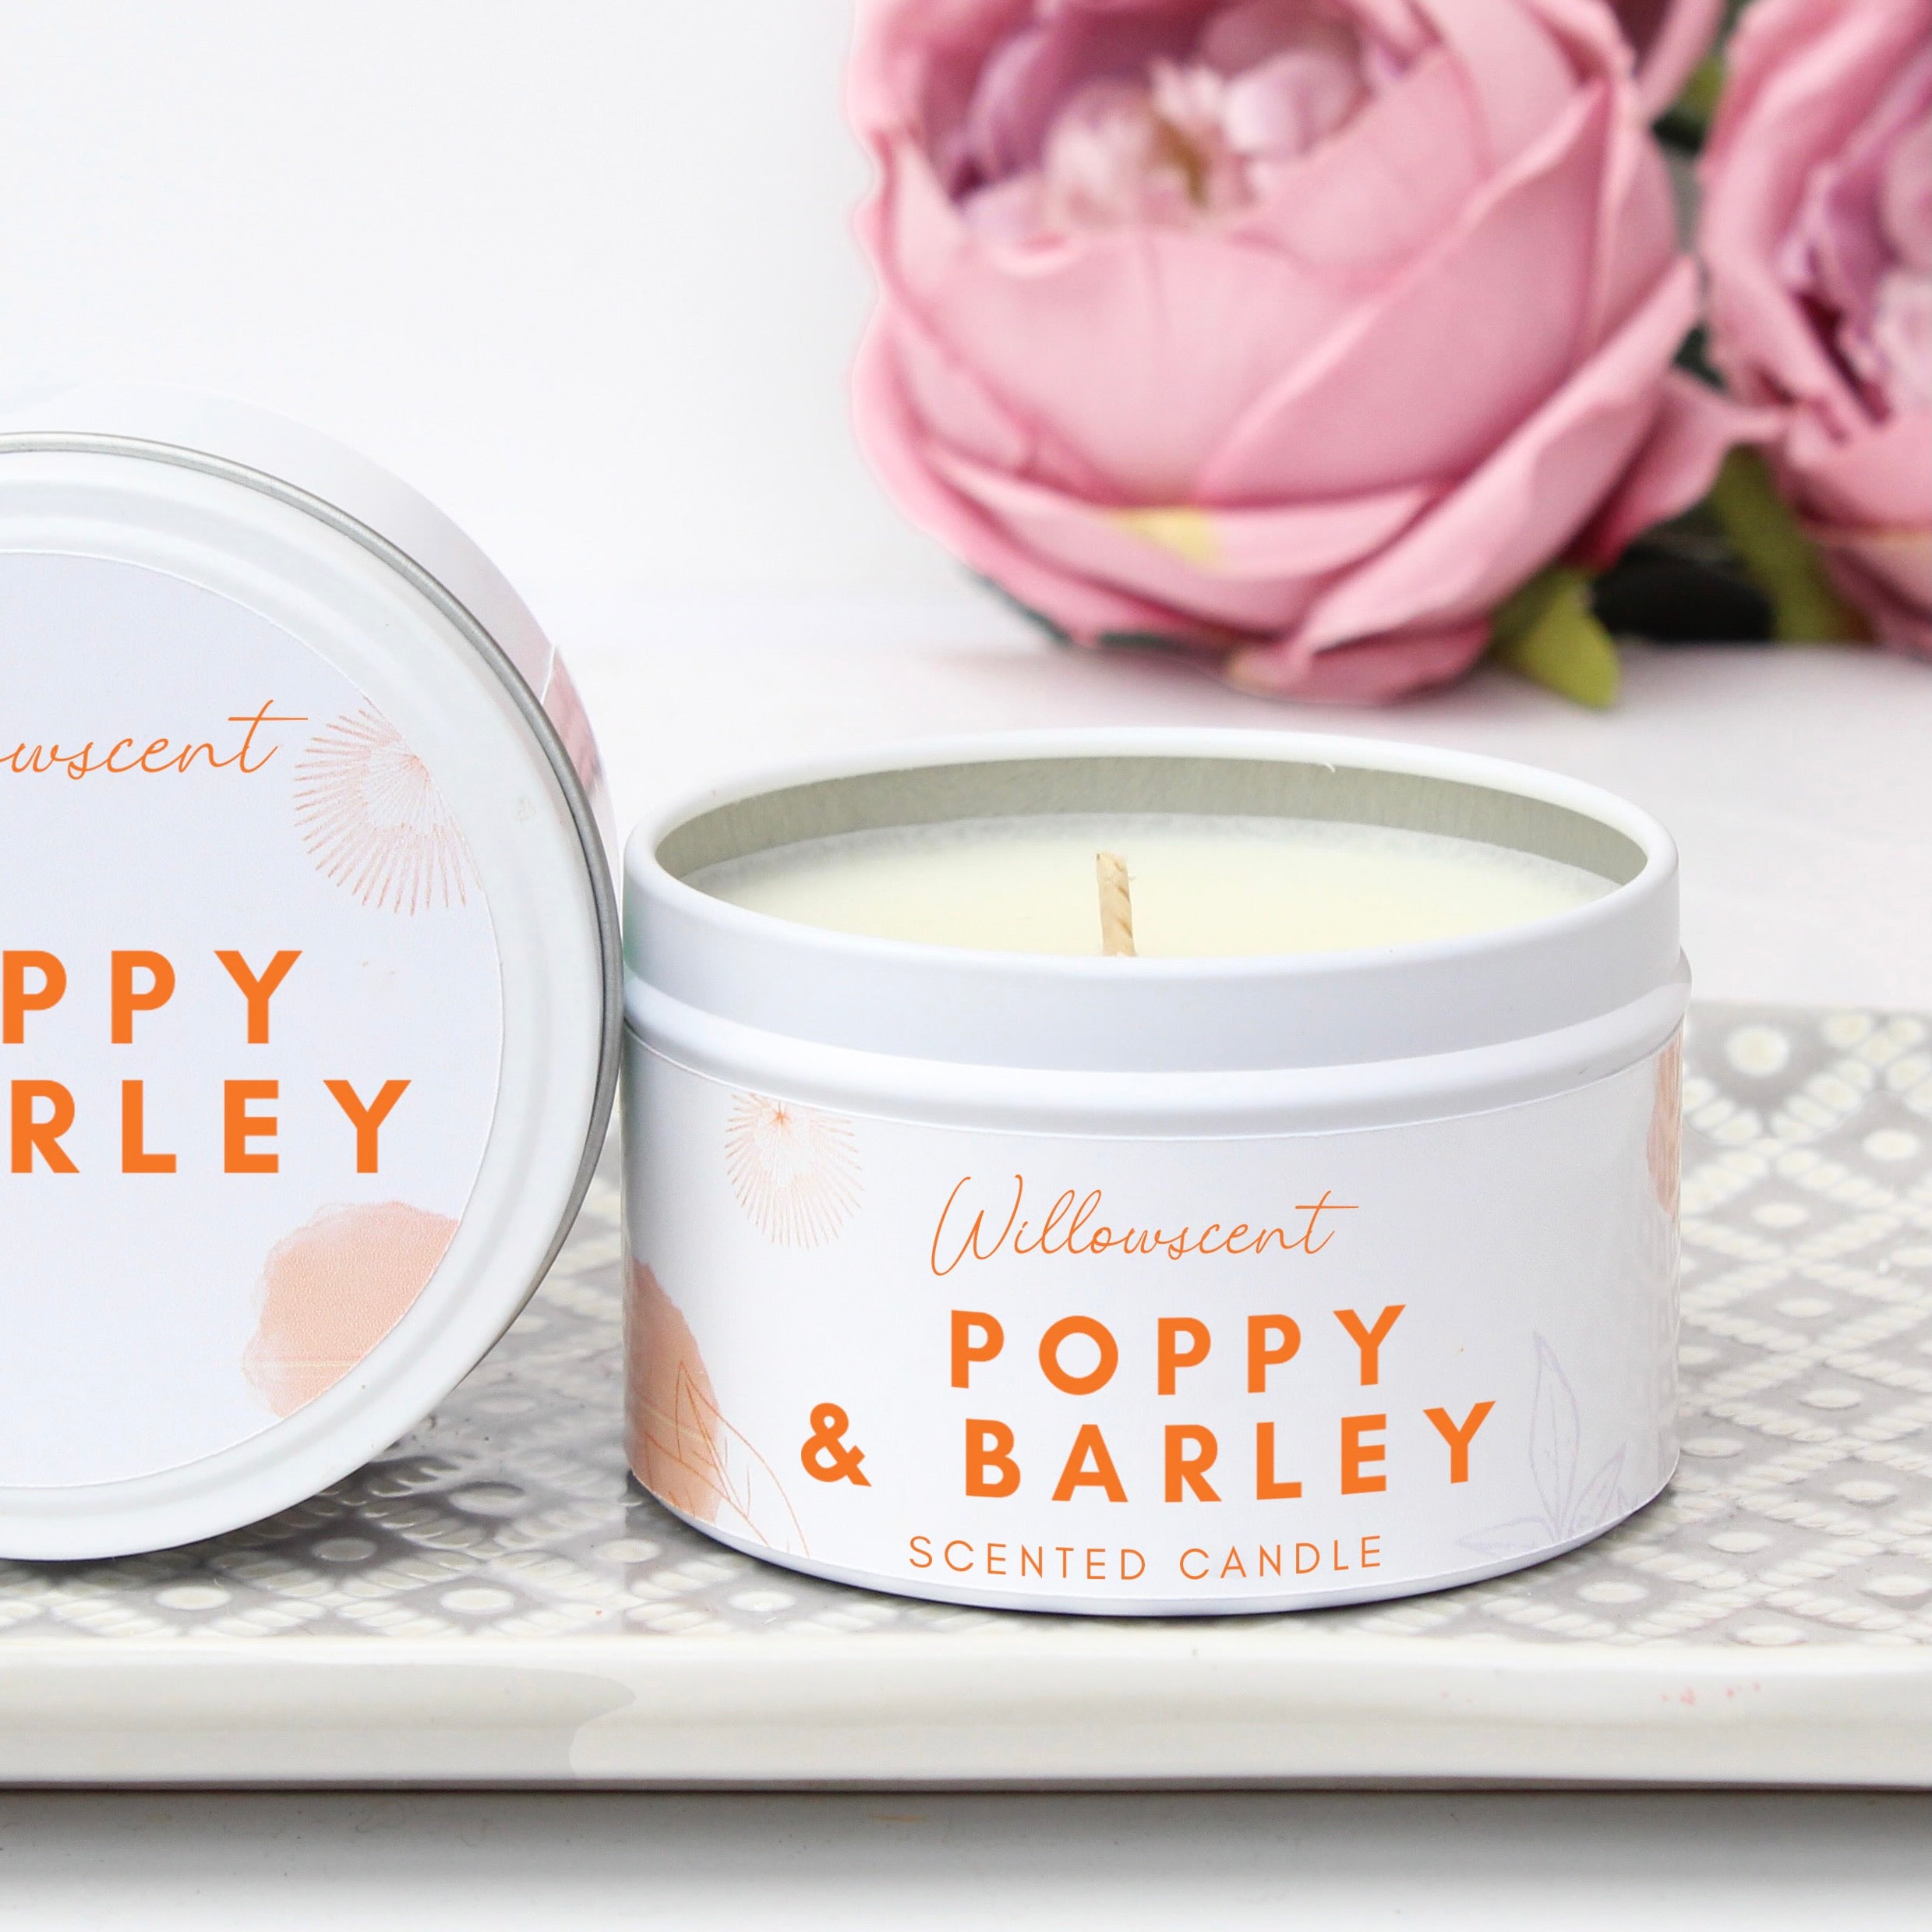 Poppy & Barley Scented Candle